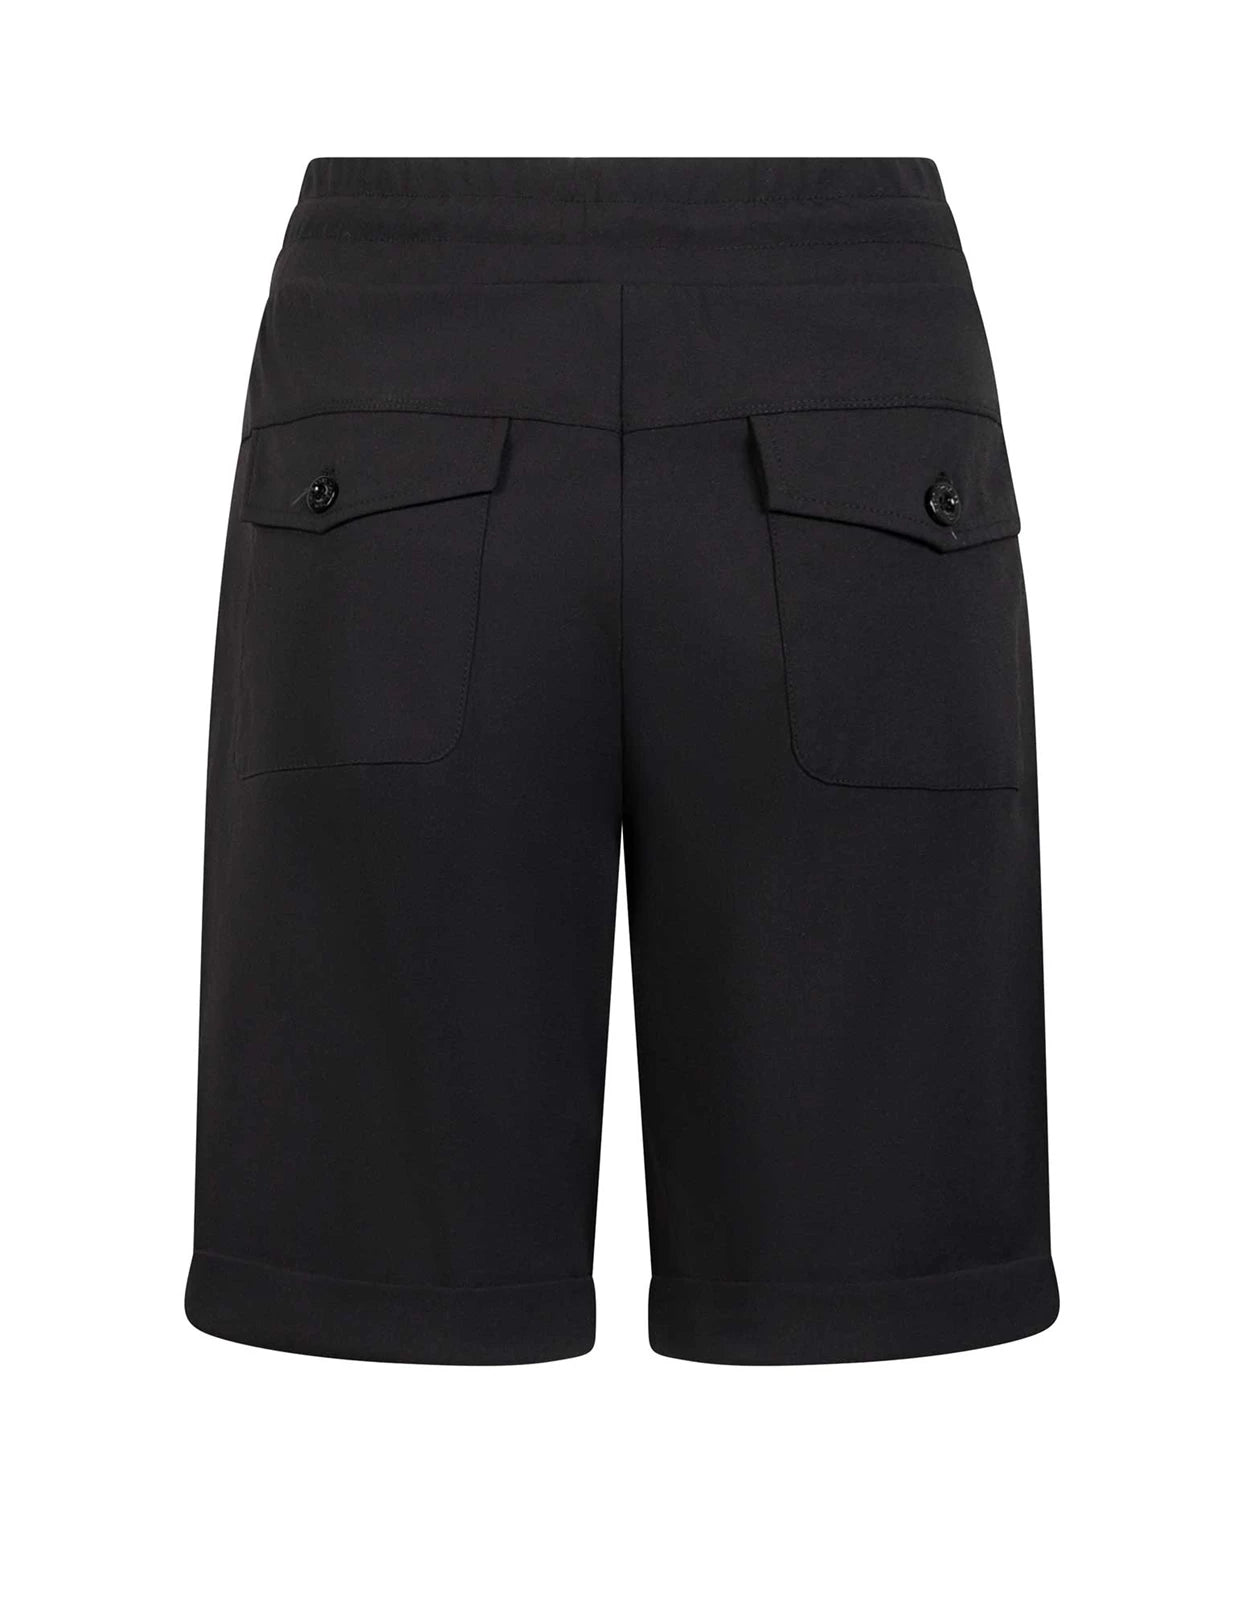 Bowie Travel Shorts in Black